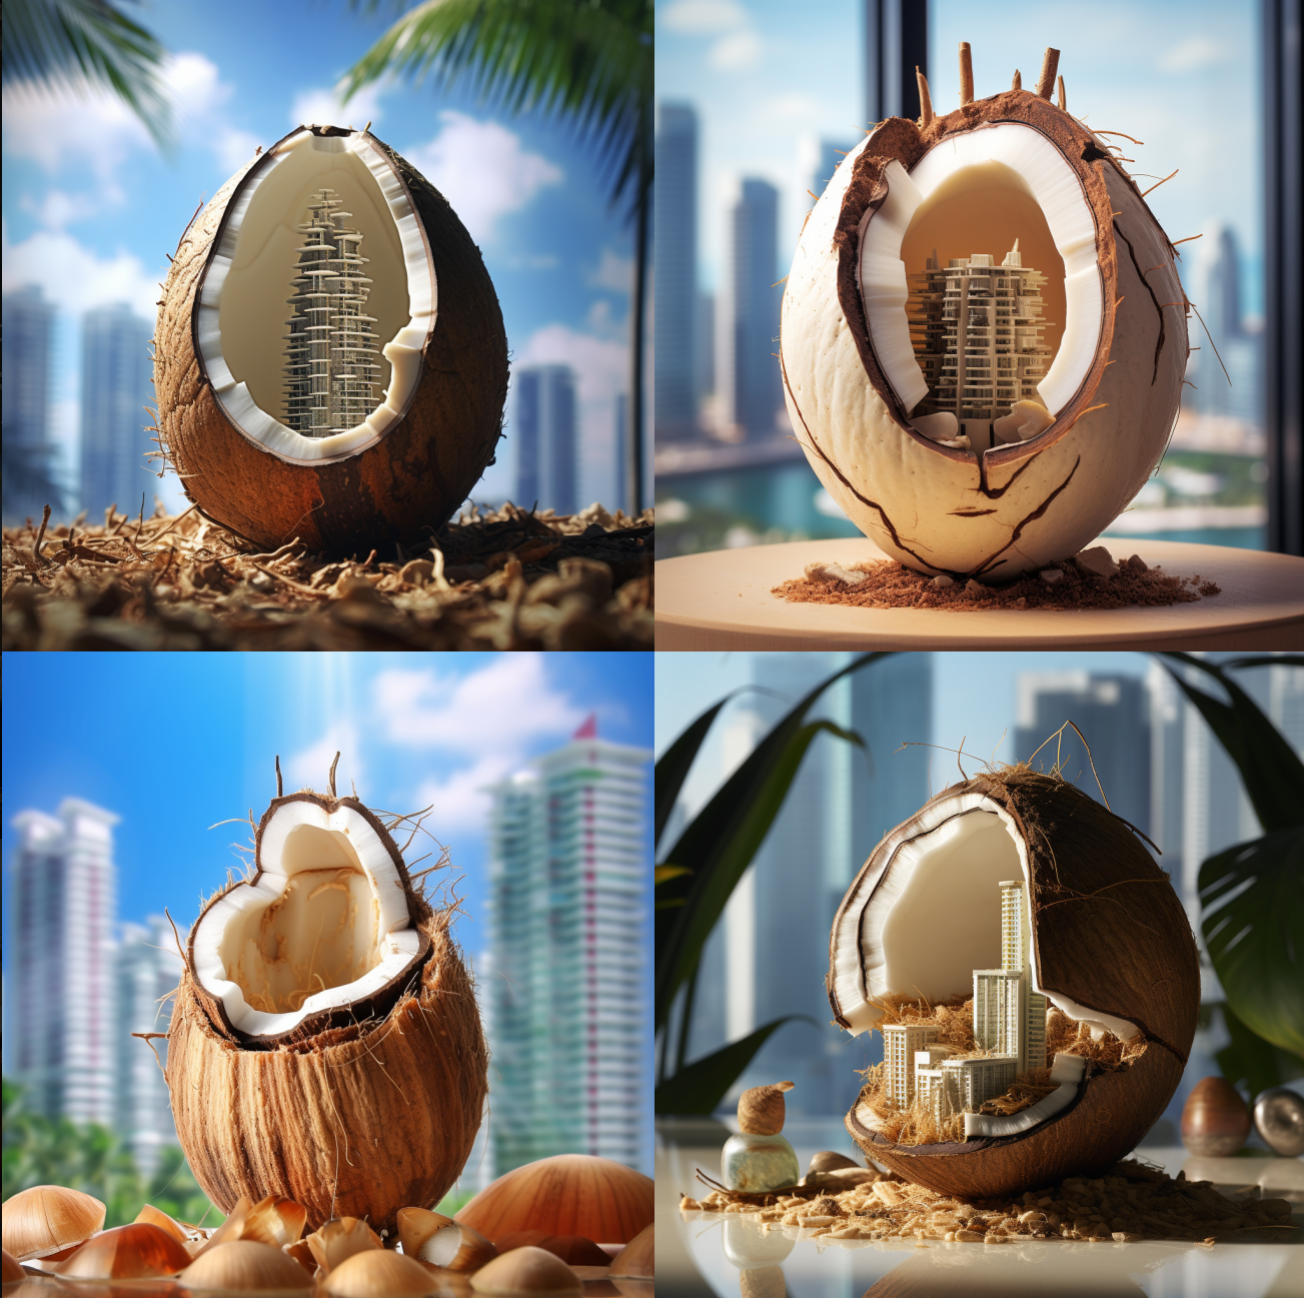 macro art photomontage, from the shell of a coconut grows an ecological skyscraper, in the background is a kitchen. 